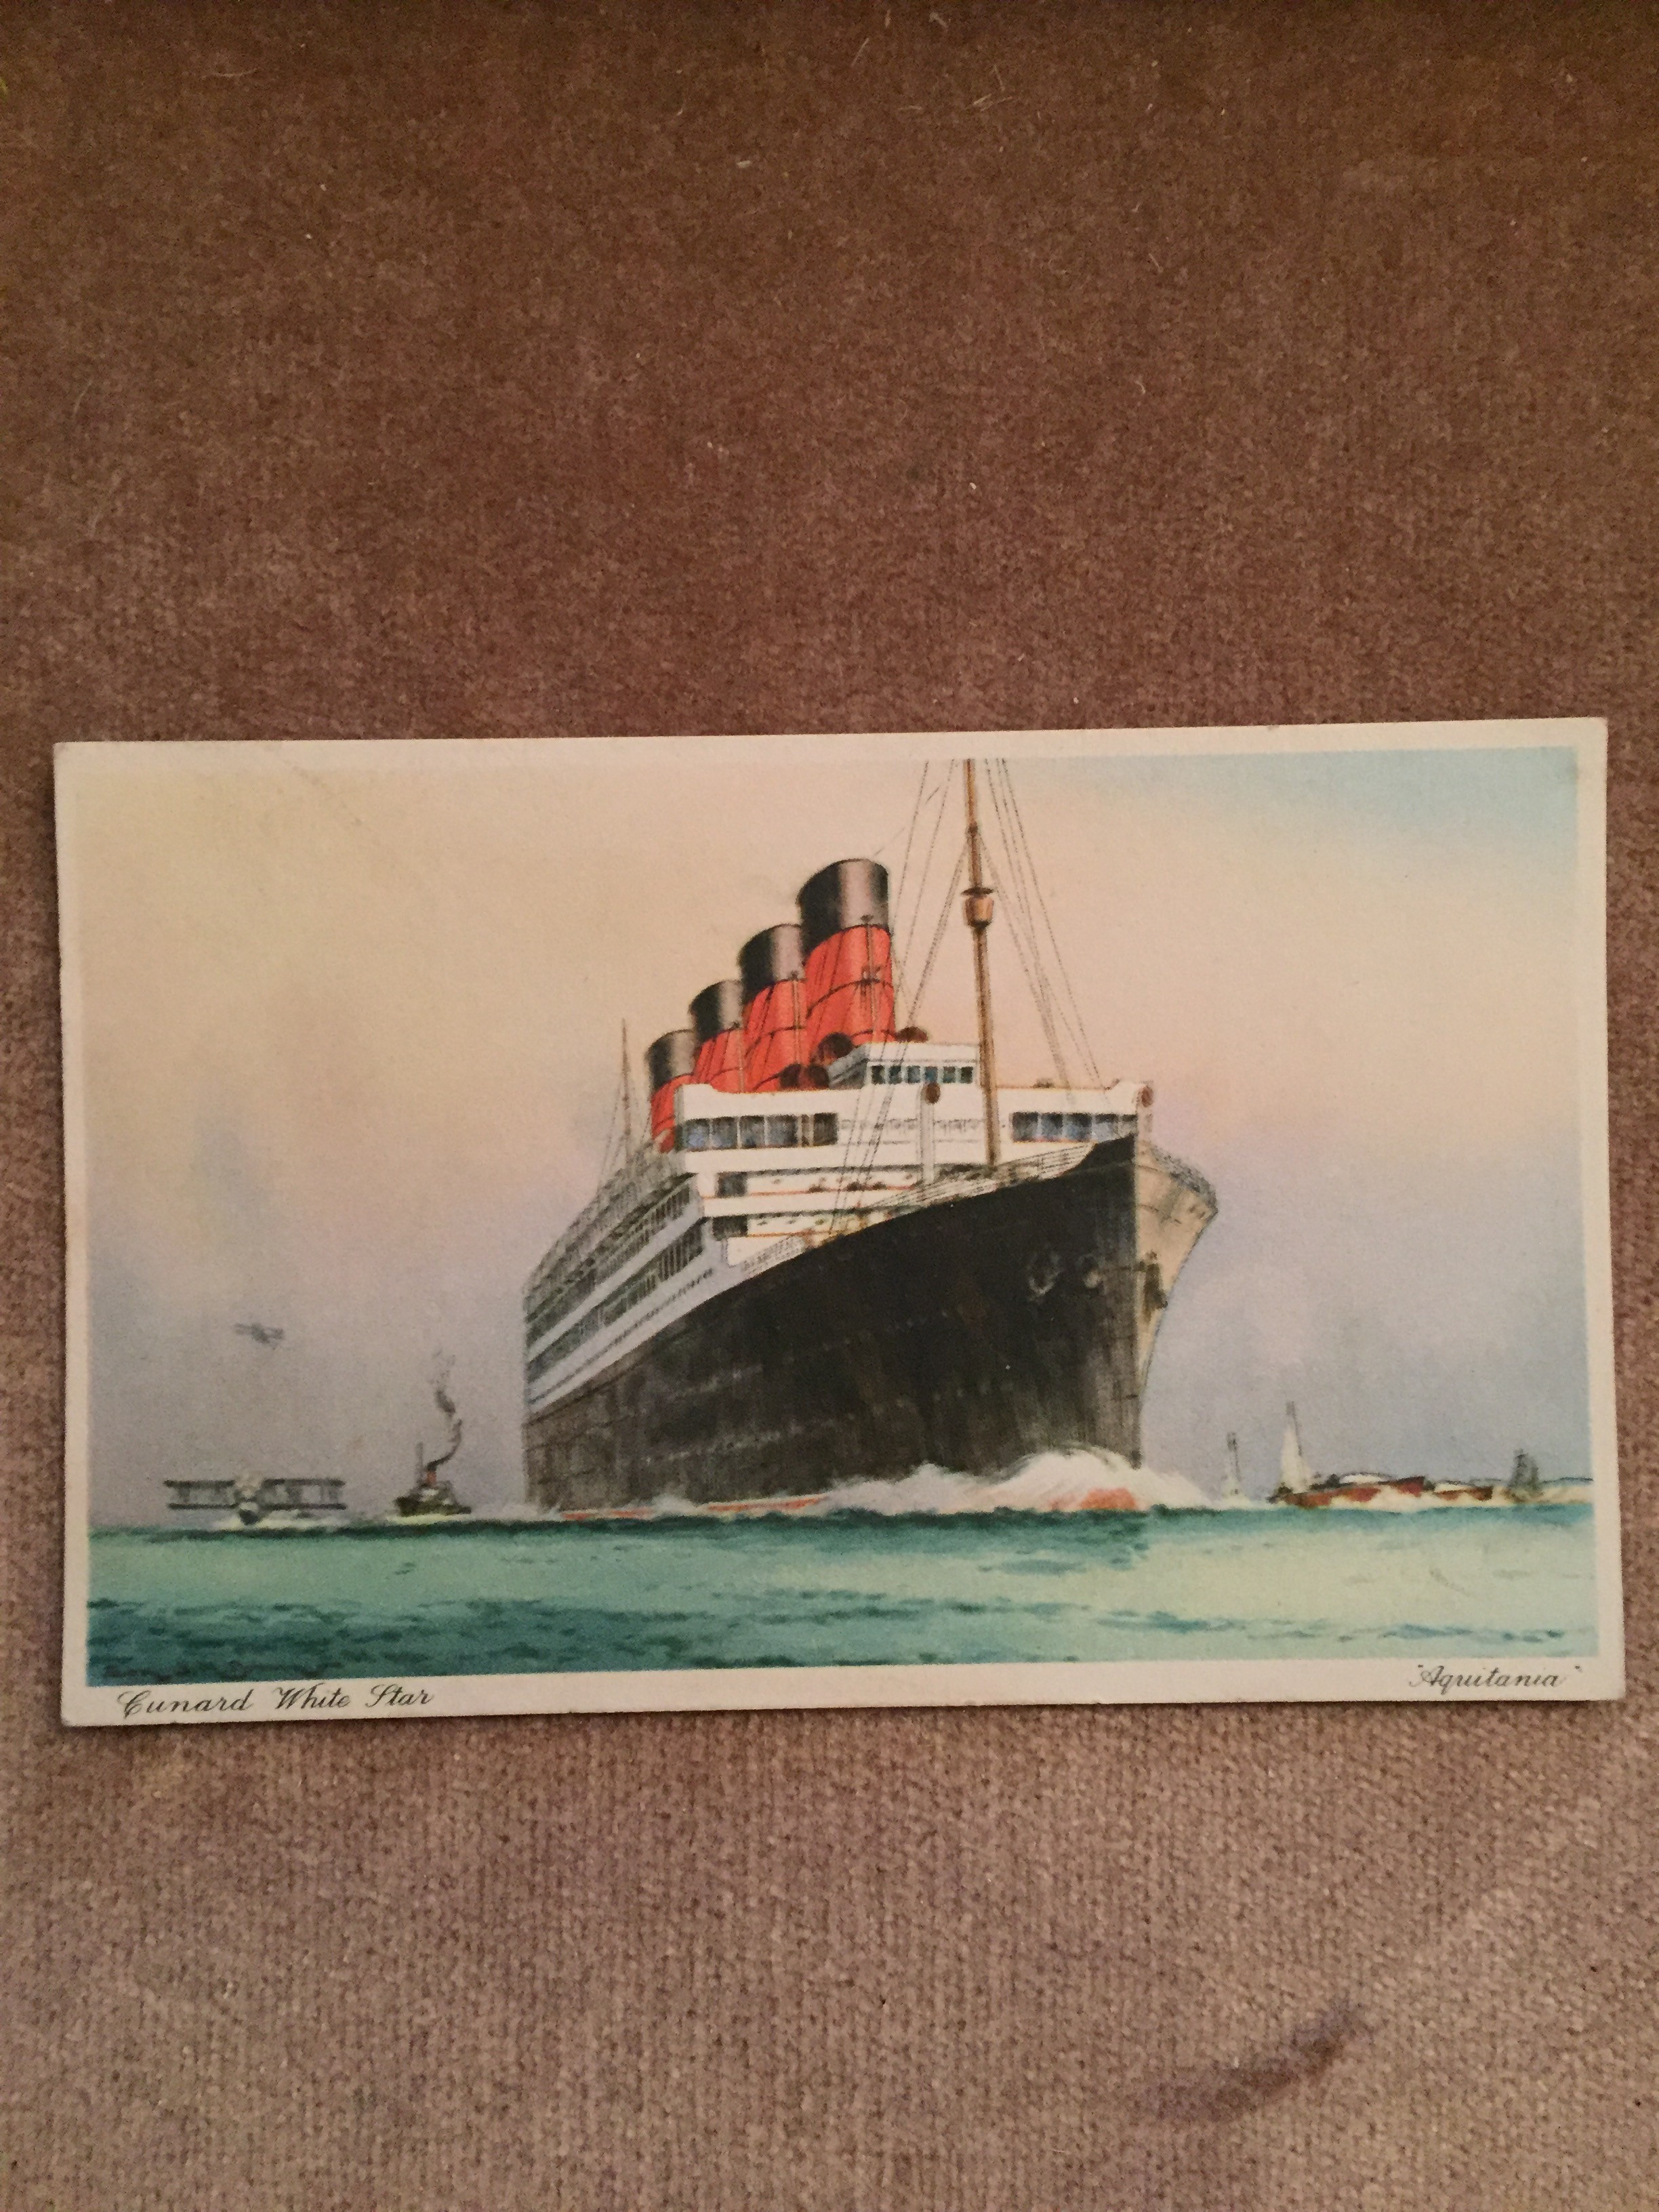 UNUSED COLOUR POSTCARD FROM THE EARLY CUNARD WHITE STAR LINE VESSEL THE RMS AQUITANIA